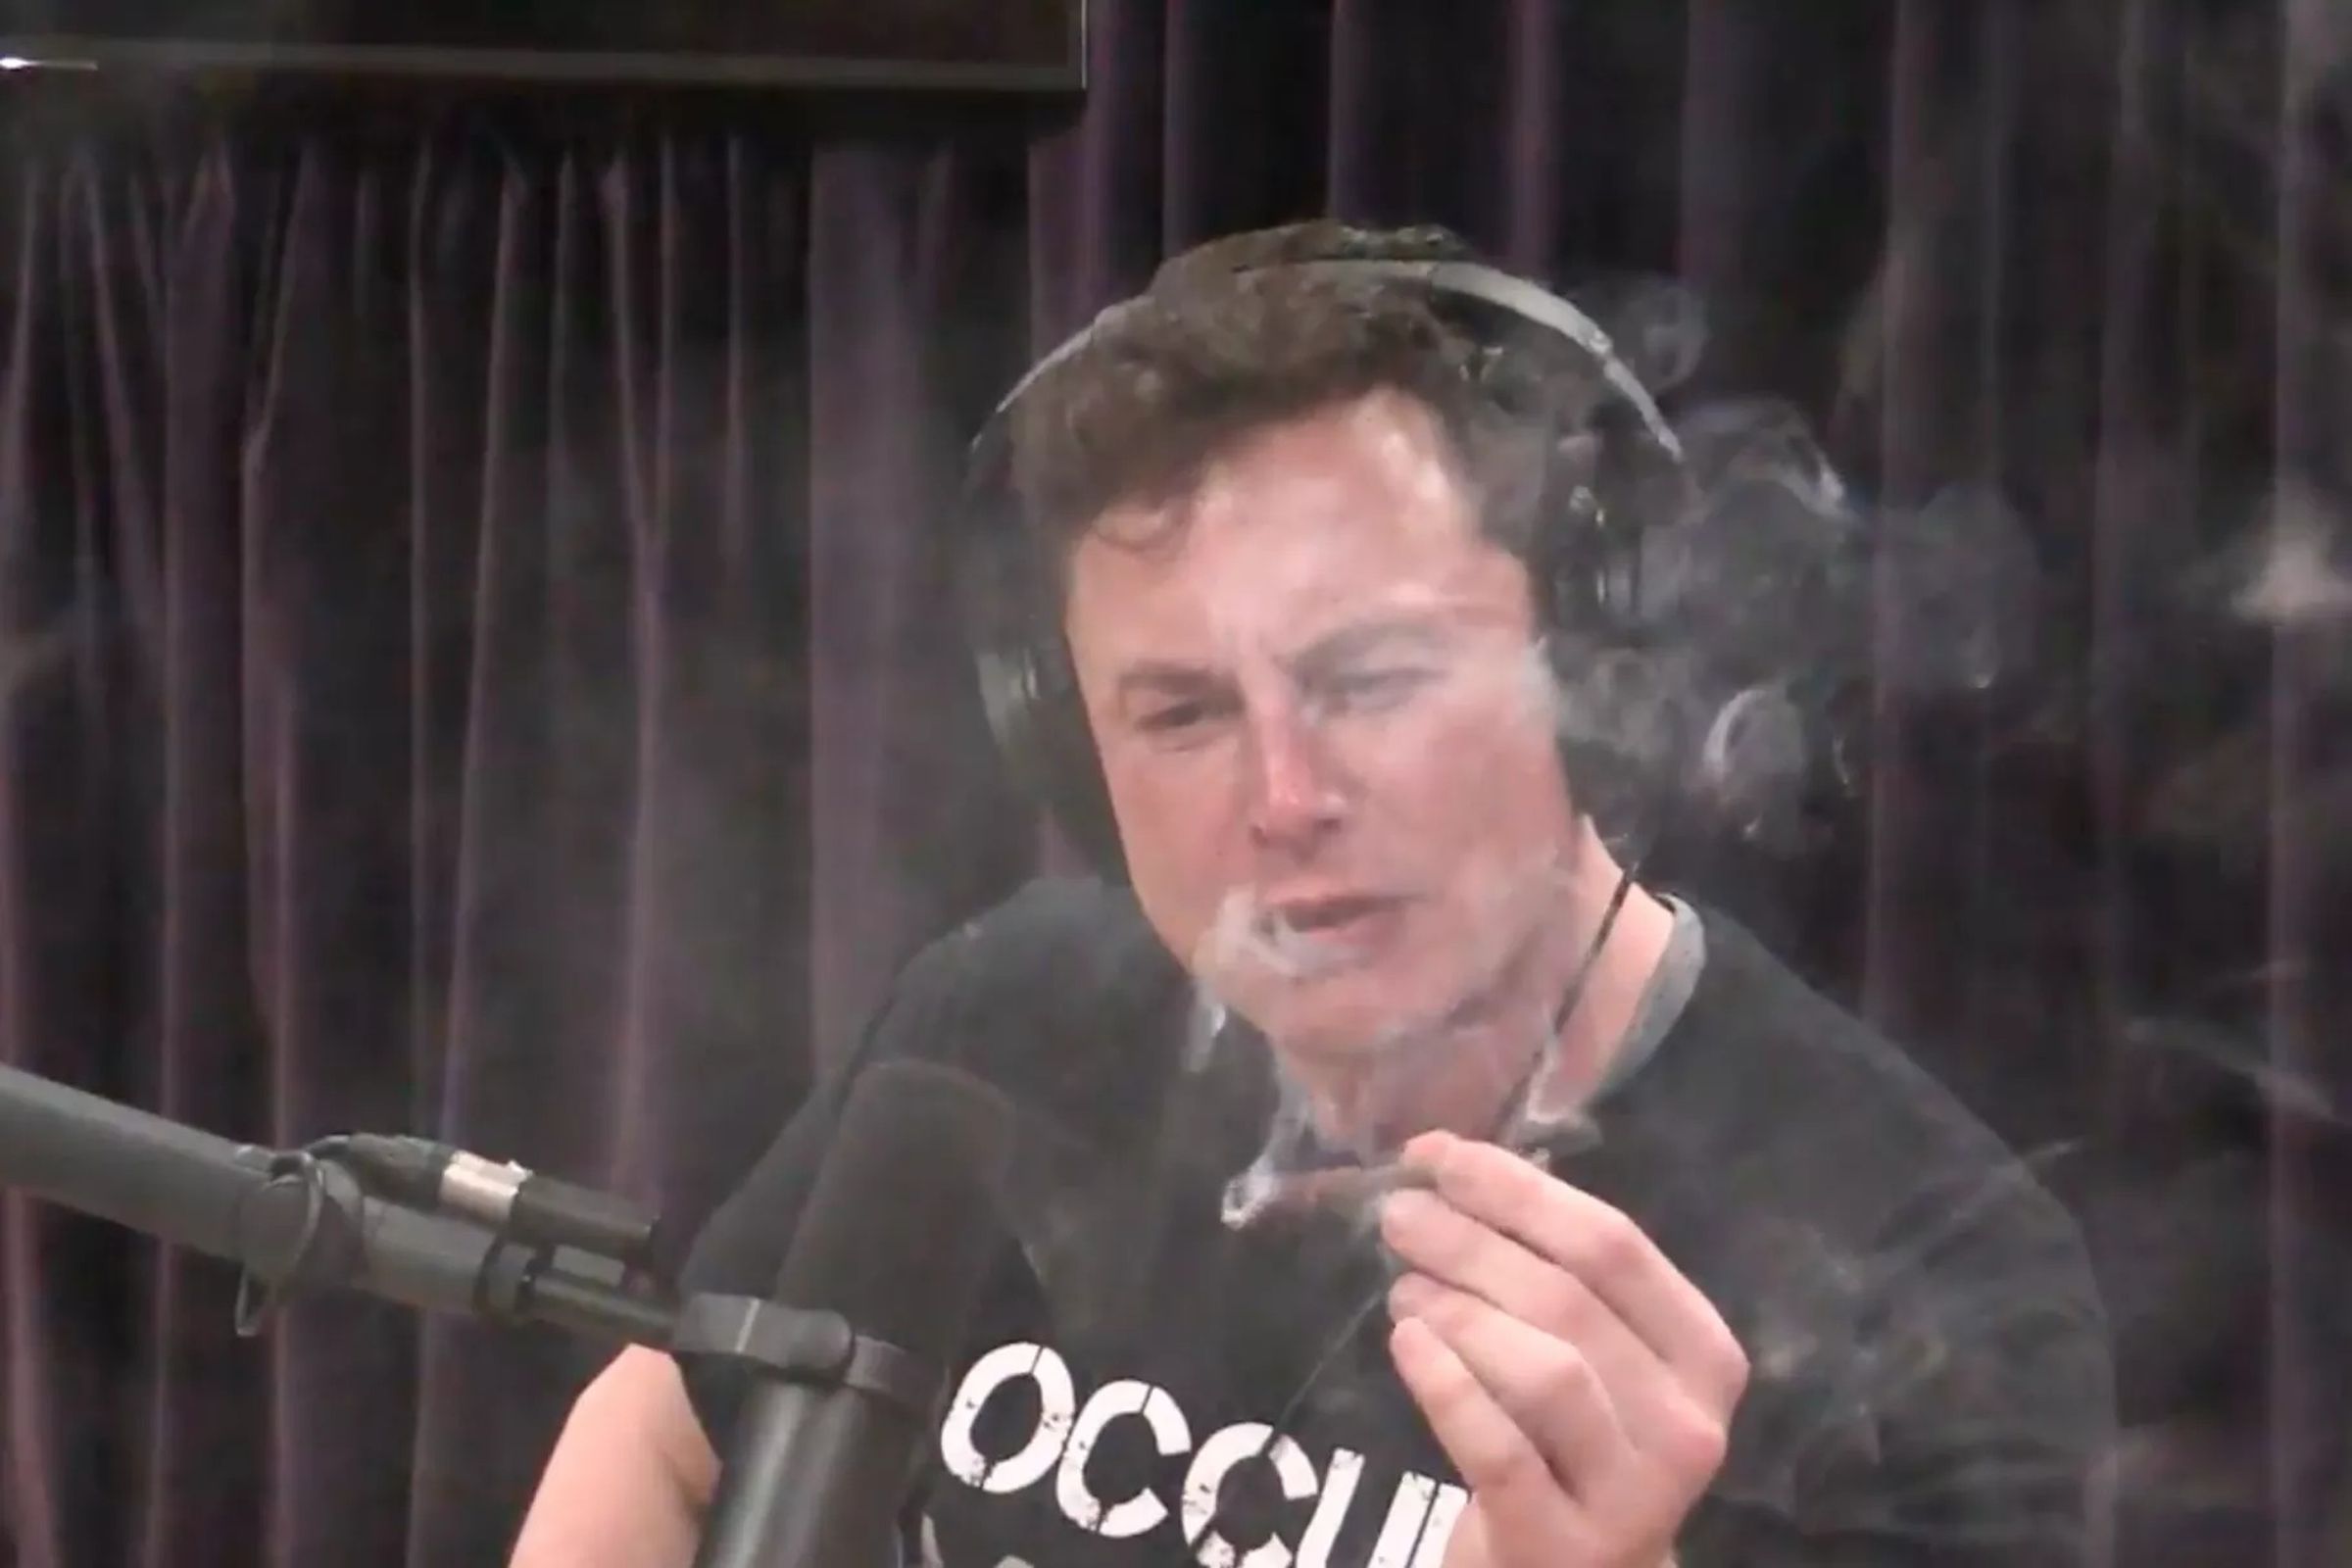 Musk after smoking weed on Joe Rogan’s podcast